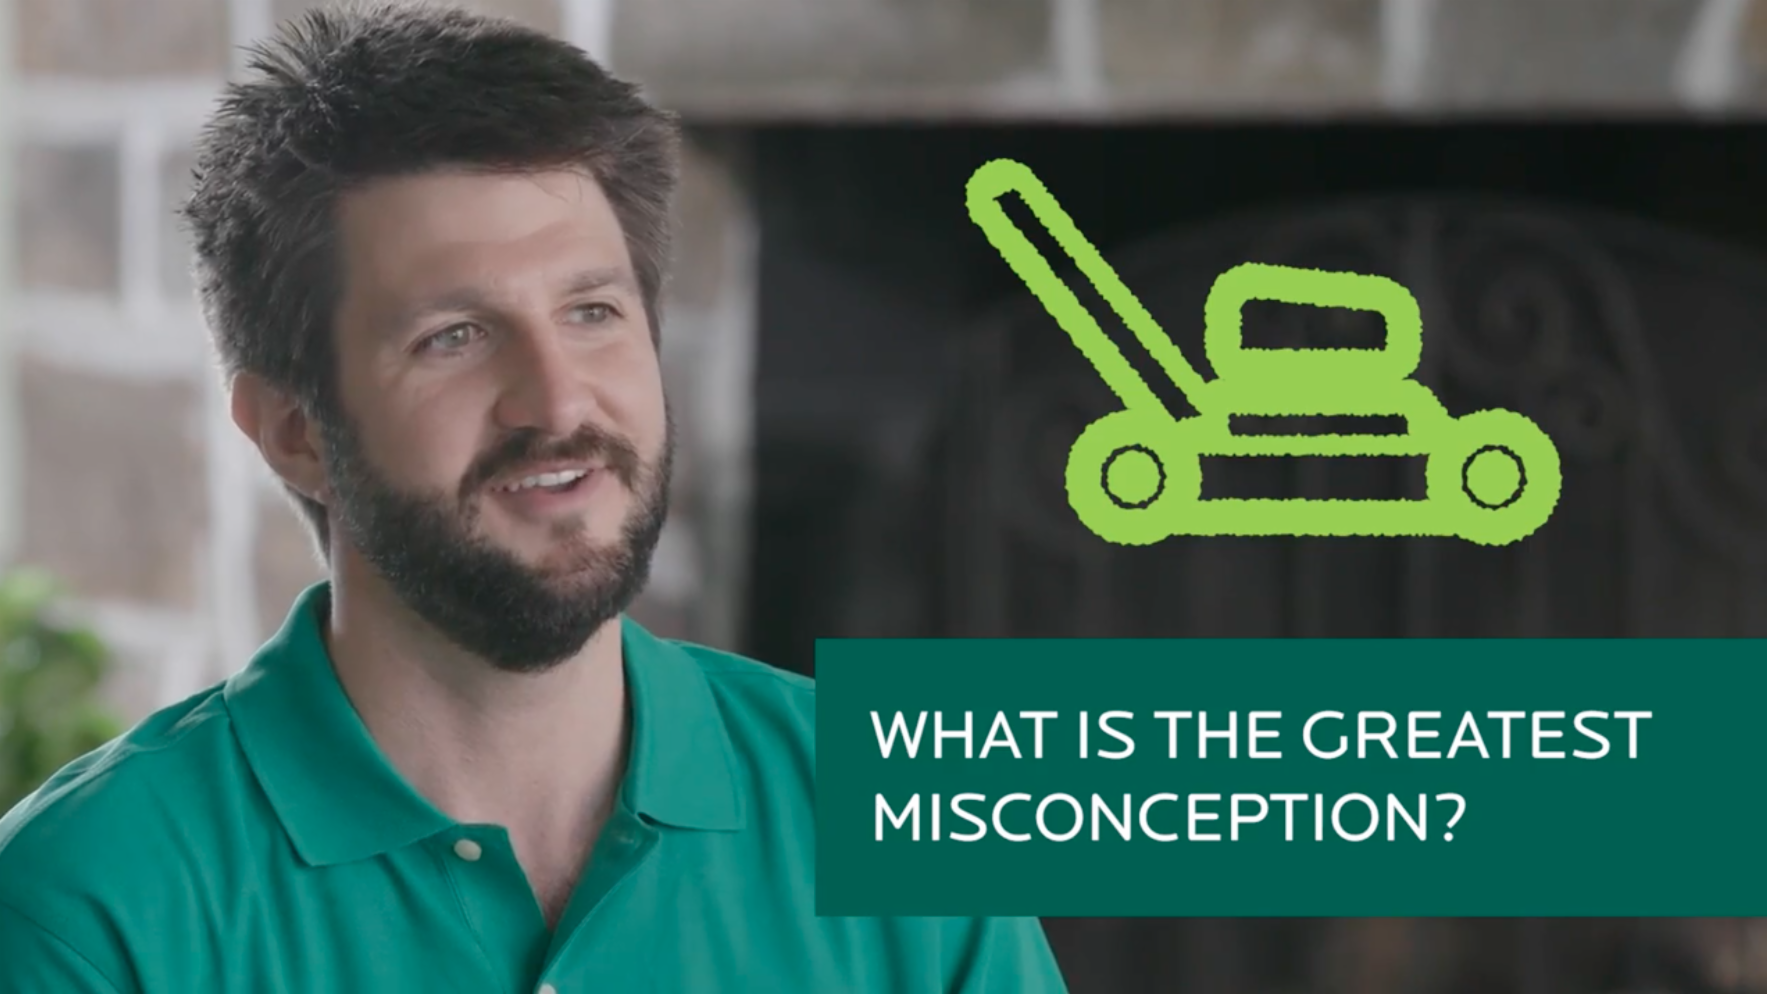 What is the Greatest Misconception about Landscaping? - Landscape Career Videos